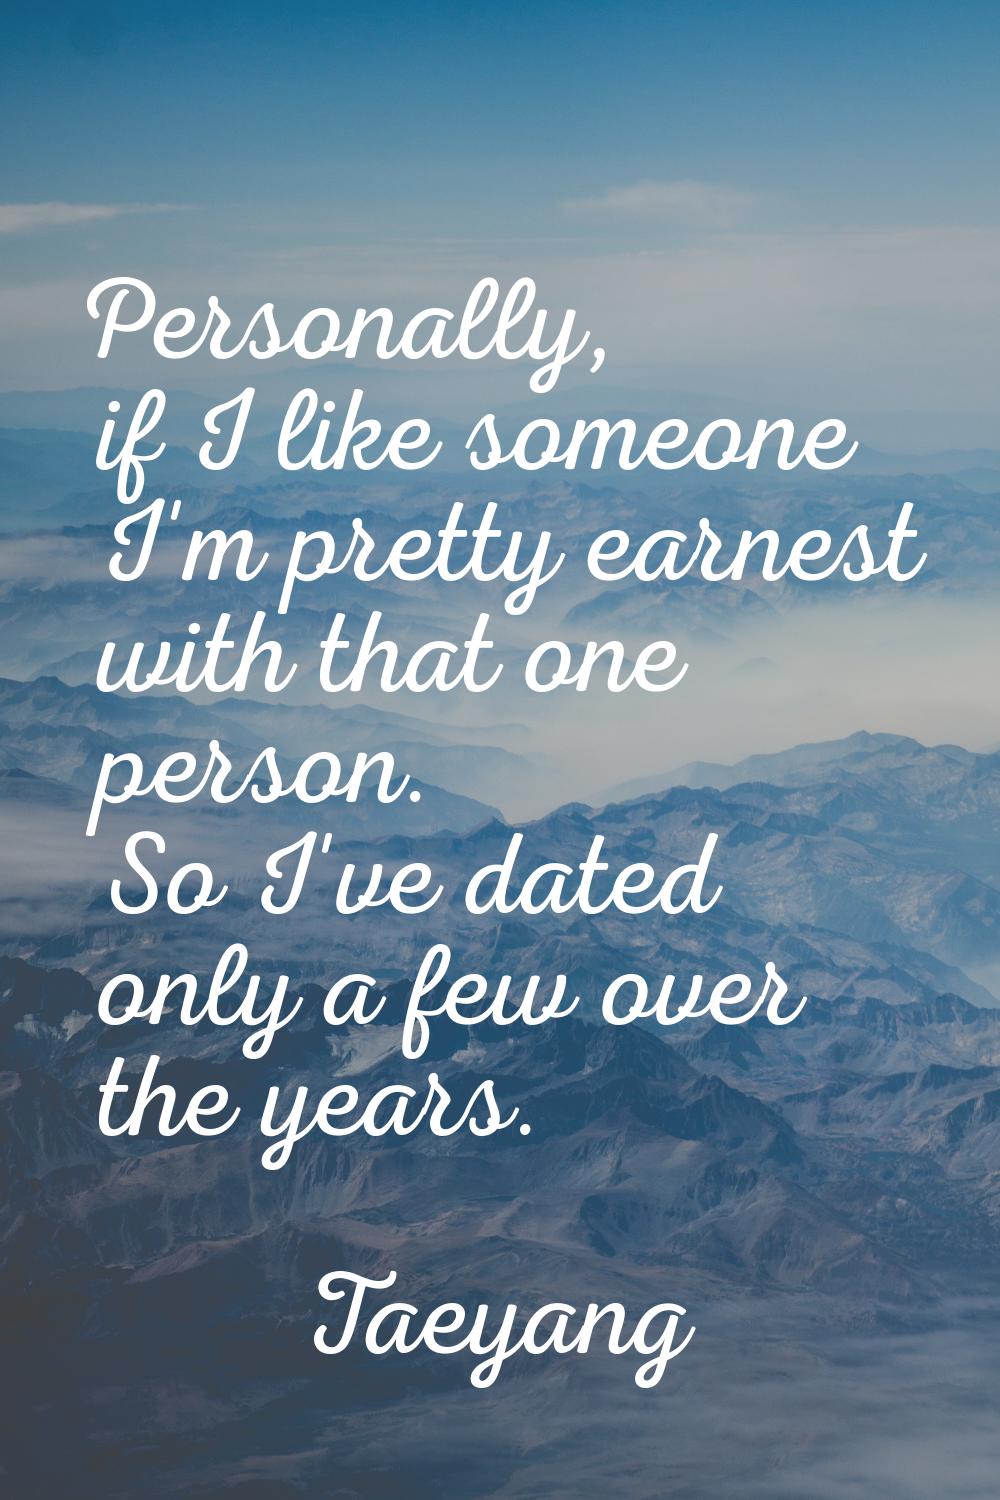 Personally, if I like someone I'm pretty earnest with that one person. So I've dated only a few ove